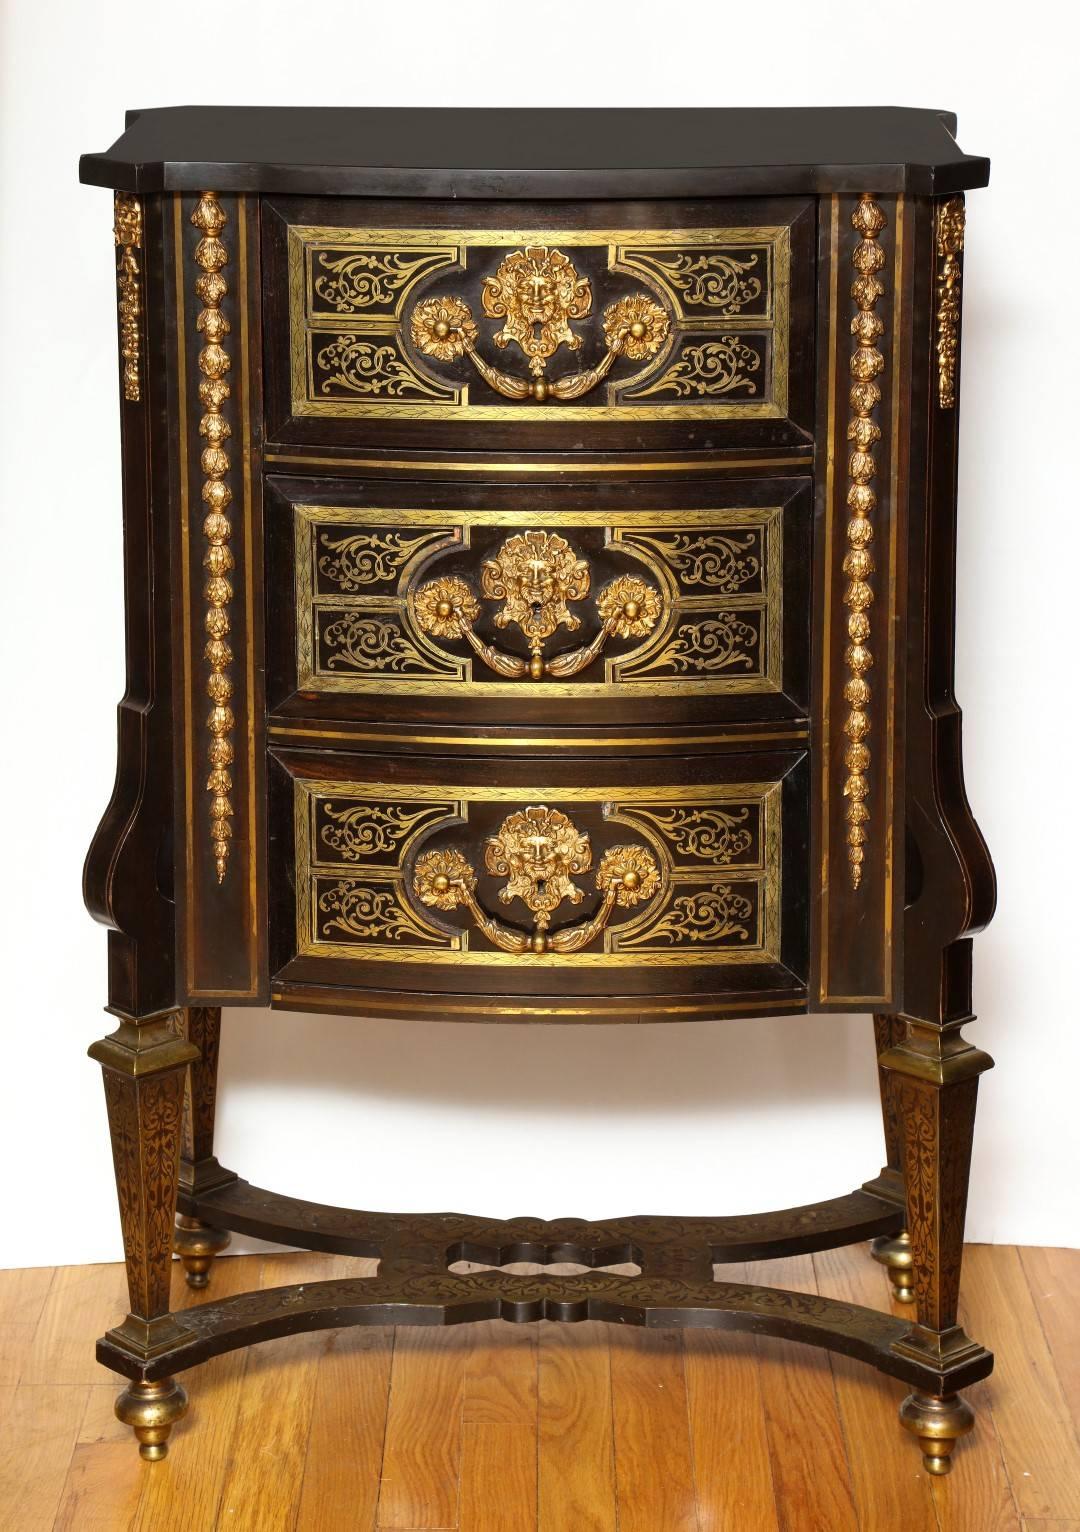 An imposing pair of Louis XIV style marble-top cabinets on stand. The front of the cabinets with three brass inlaid boulle work frieze drawers mounted with gilt bronze grotesque keyhole escutcheons behind acanthus clad handles. The sides mounted